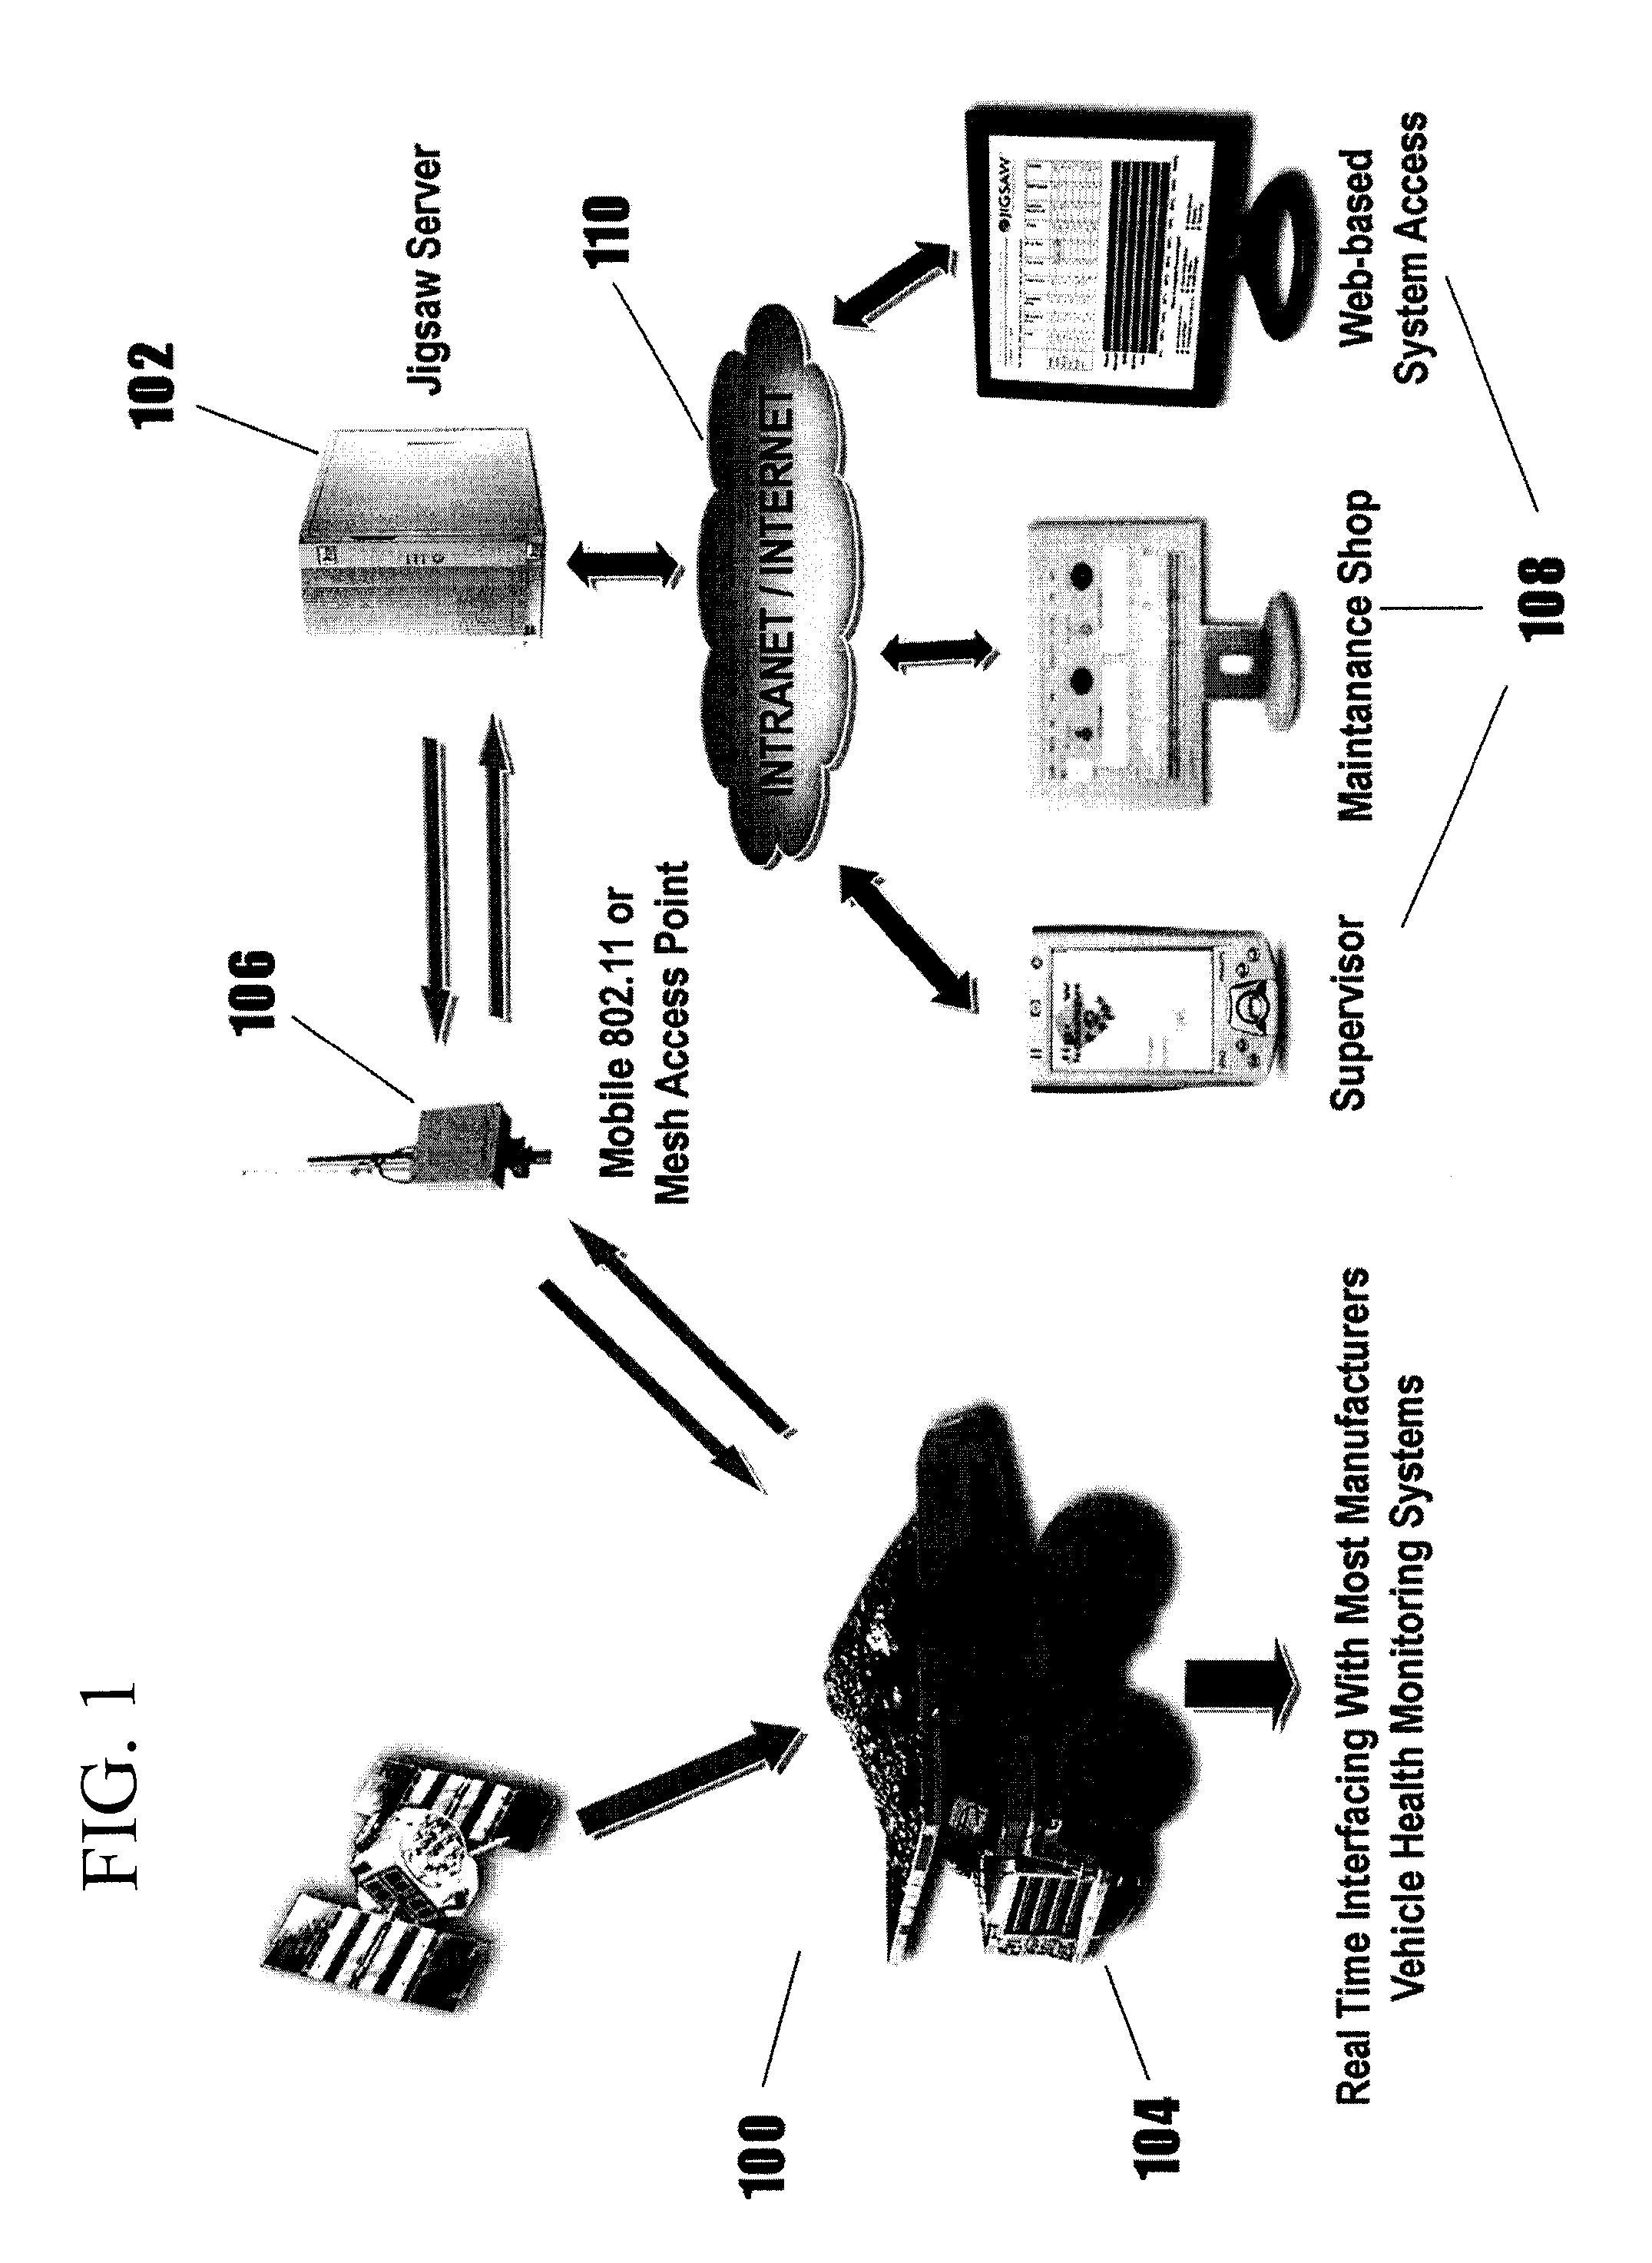 Computerized mine production system